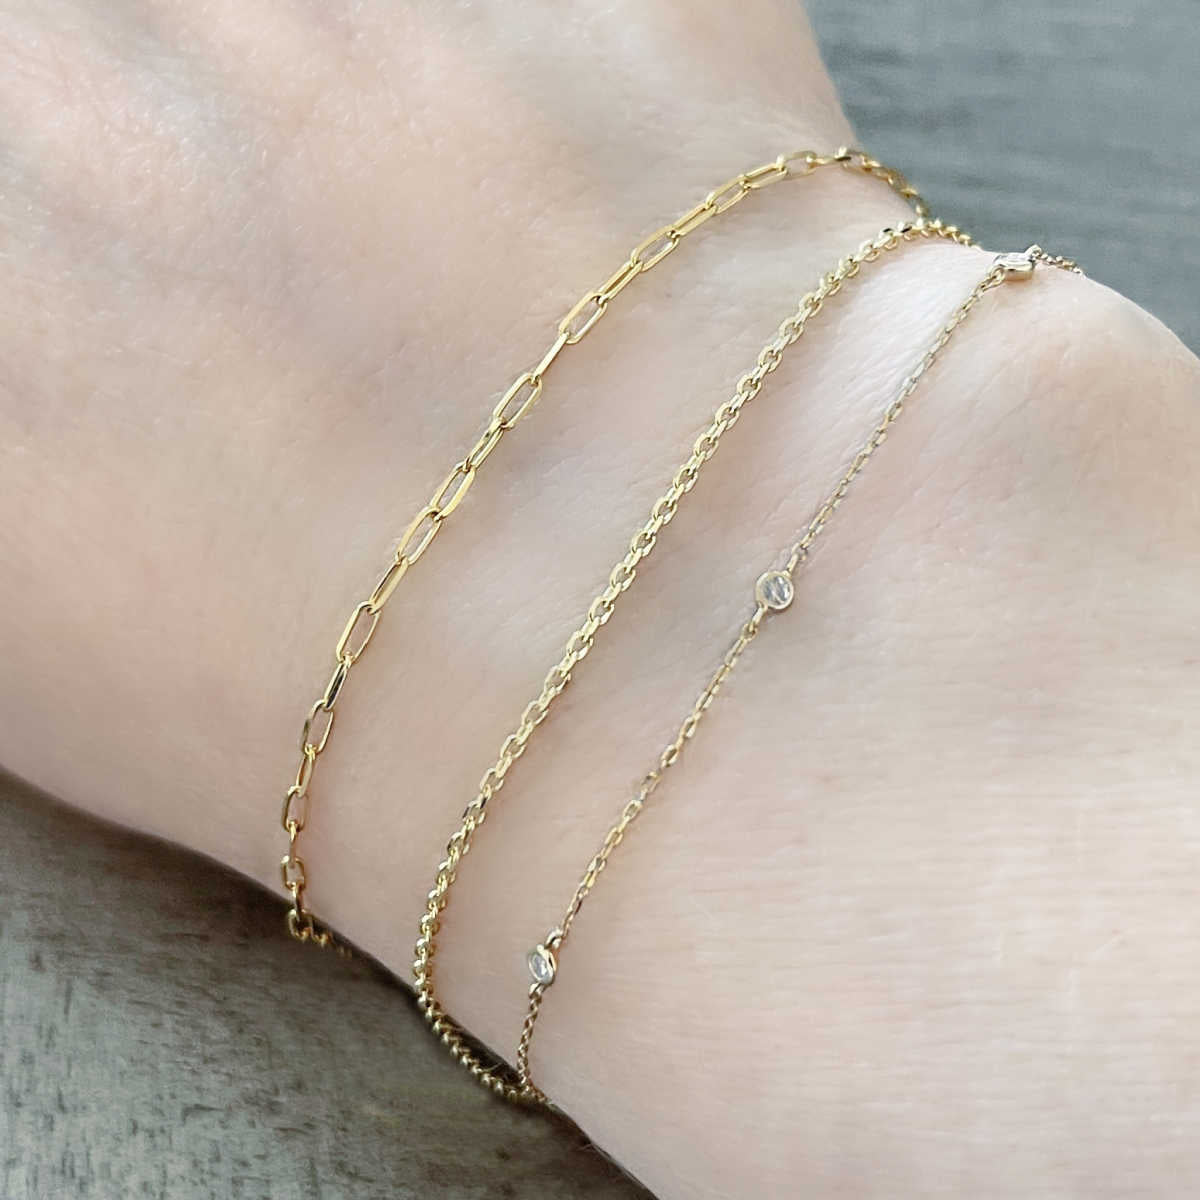 Yellow Gold Cable Chain Bracelet